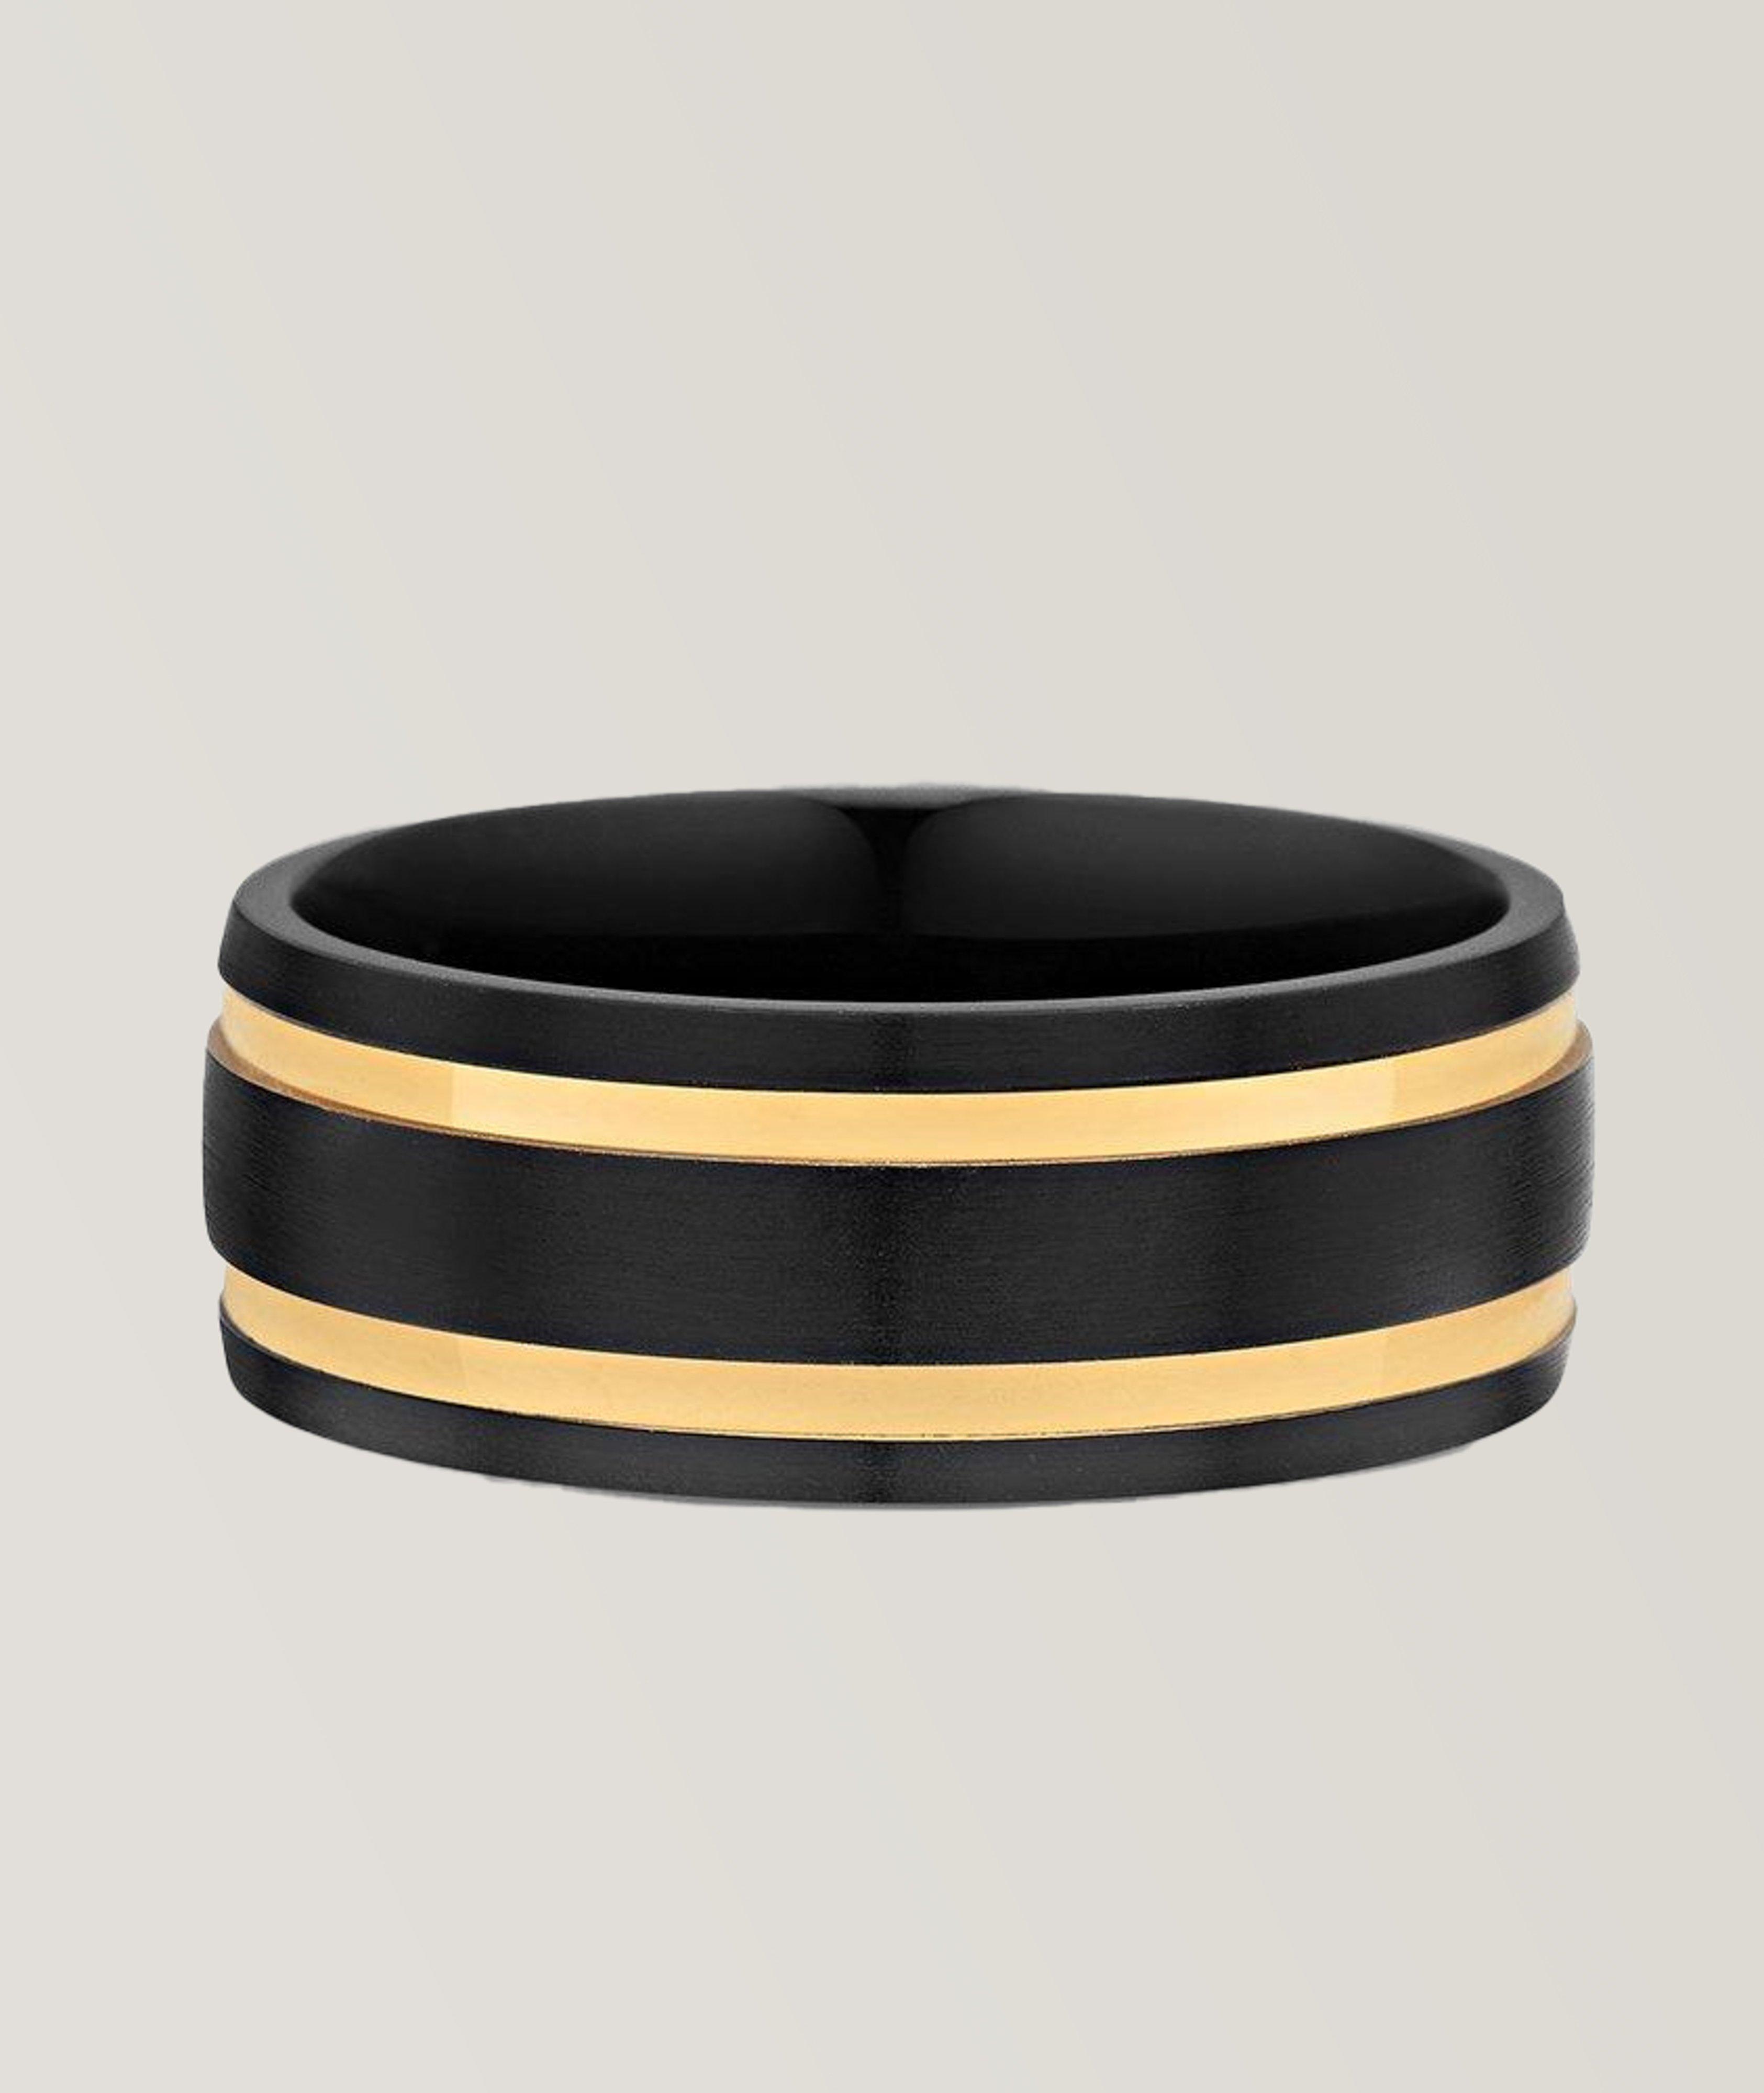 Black Band Ring With Gold image 0